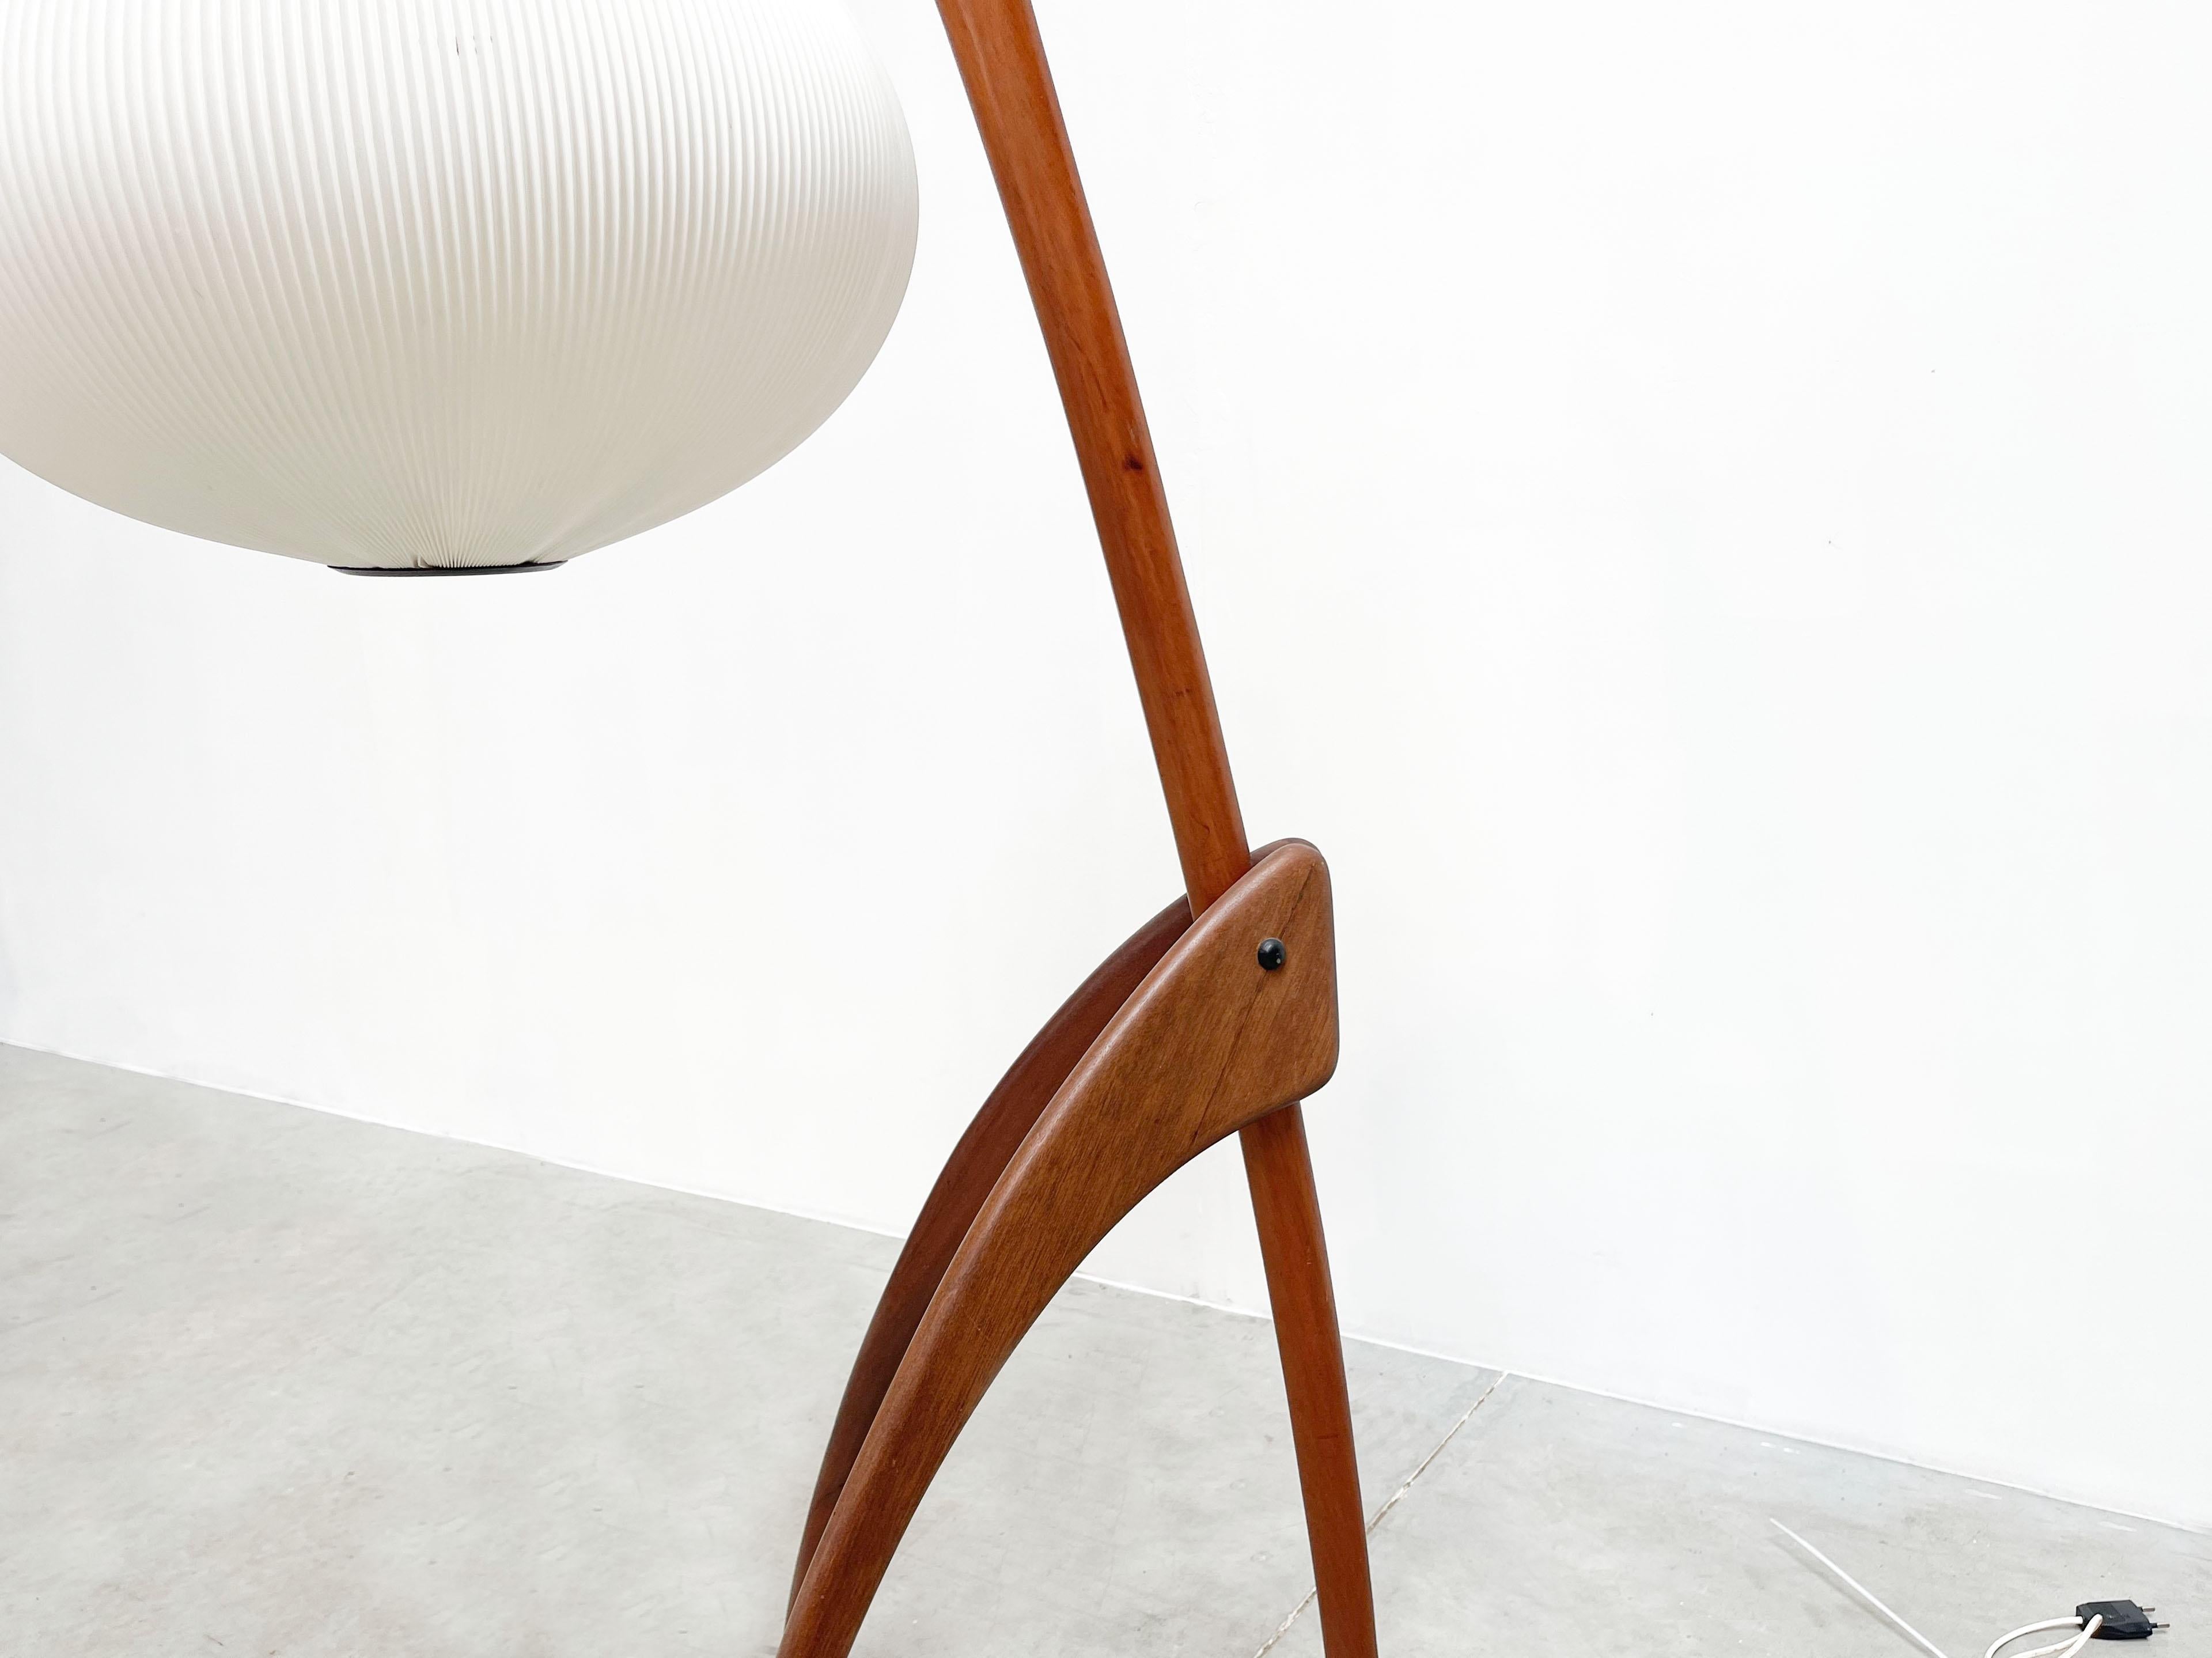 Jean Rispal Praying Mantis
A 1950s floor lamp made by Jean Rispal. The lamp always attracts attention due to its very simple appearing design and organic shape.

 

Jean Rispal took his inspiration from the dynamic shape of a praying mantis. He